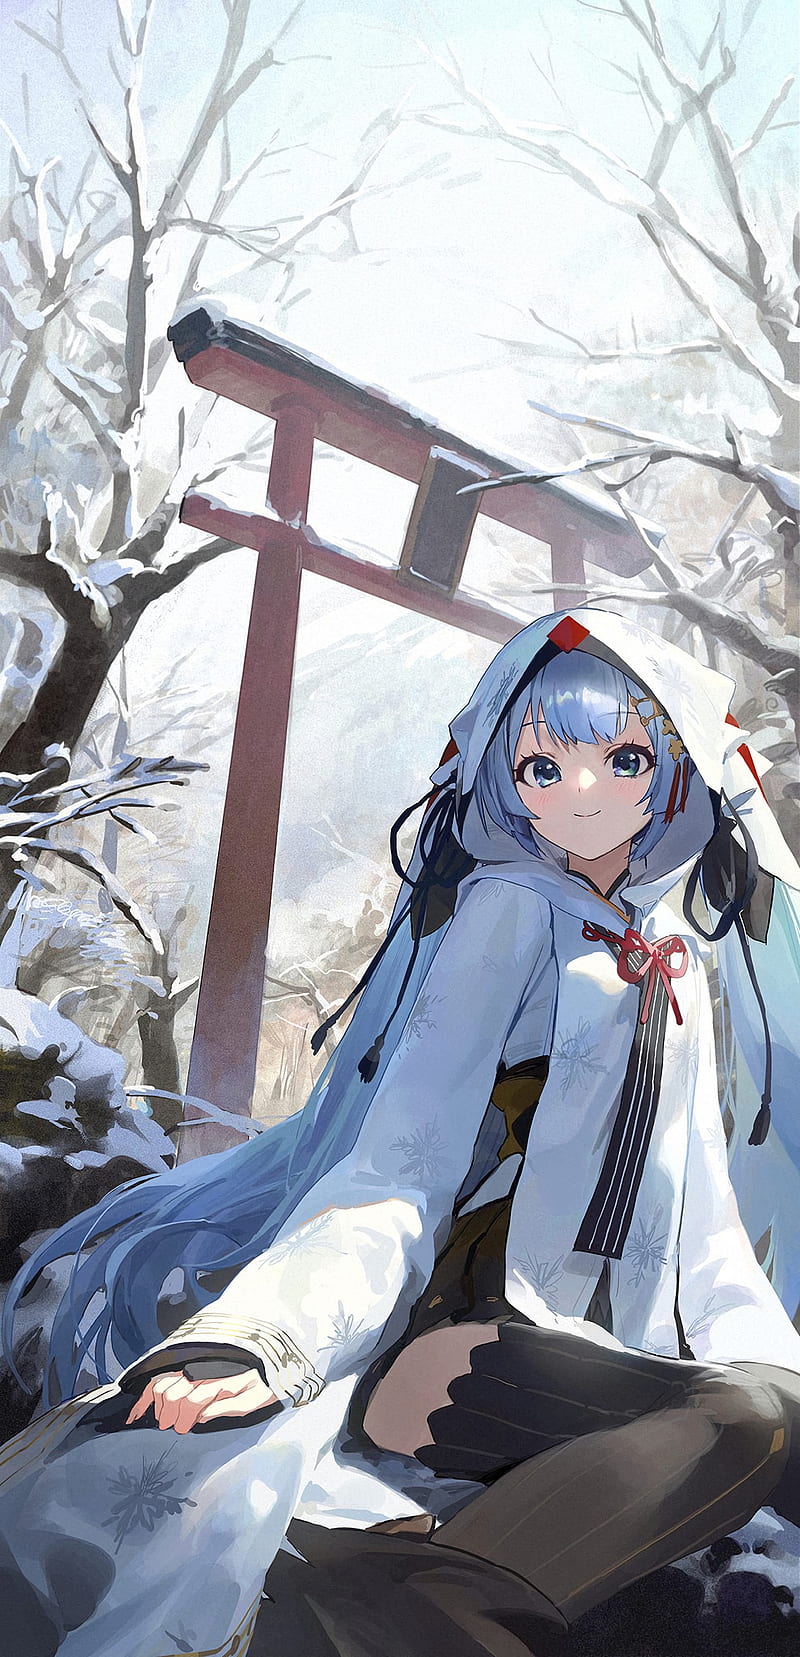 212 Snow Background Anime Stock Video Footage - 4K and HD Video Clips |  Shutterstock